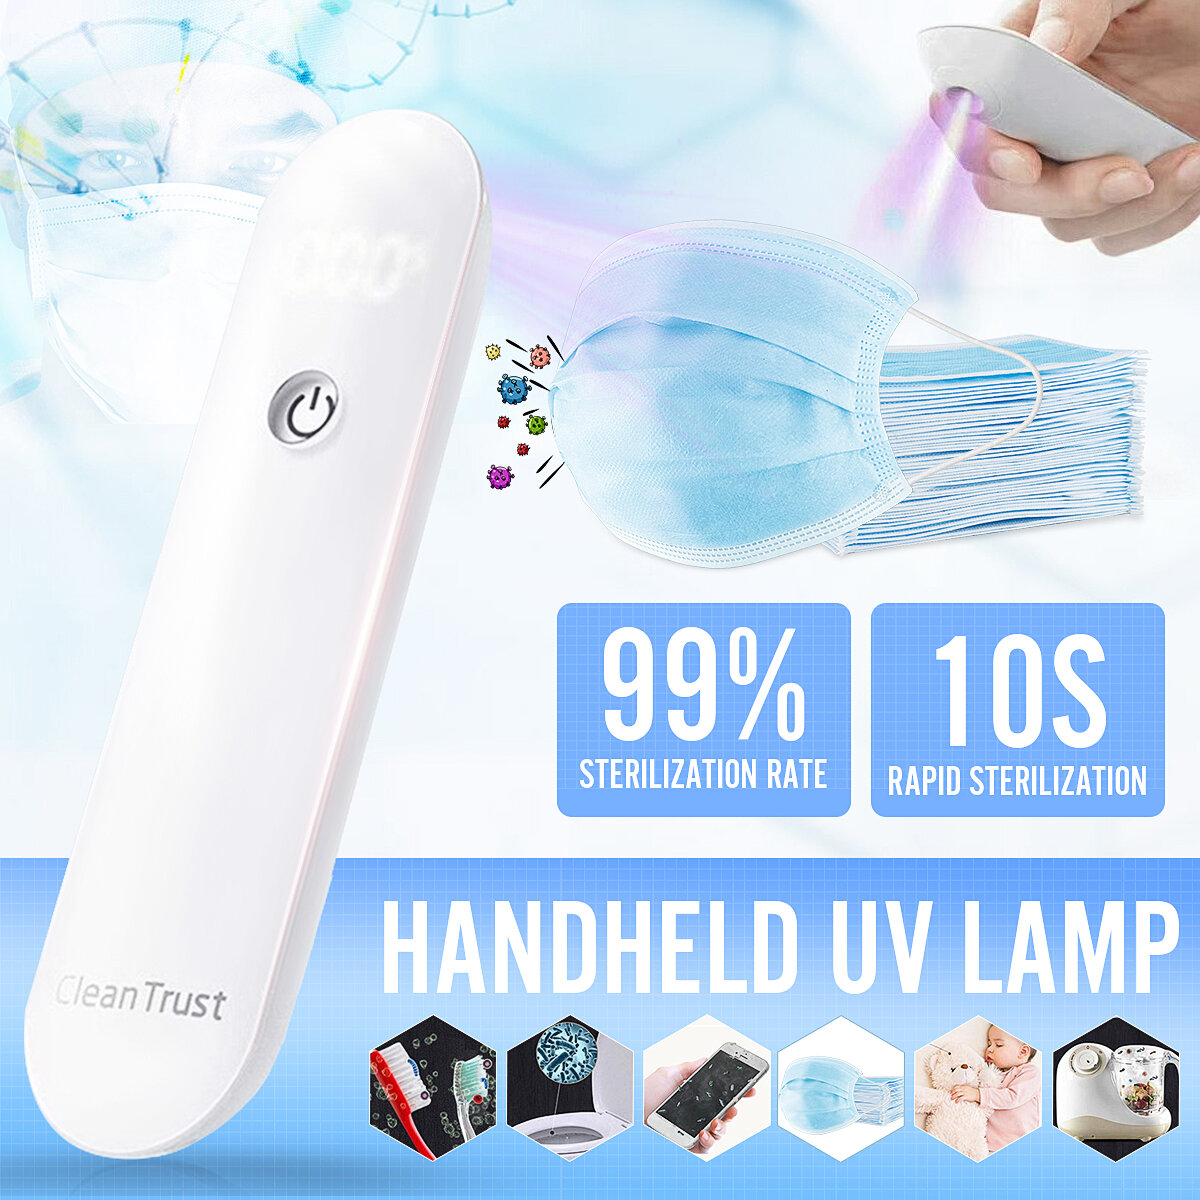 Portable LED UV Sterilizer Lamp Disinfection Handheld For Phones Clothes Bedding